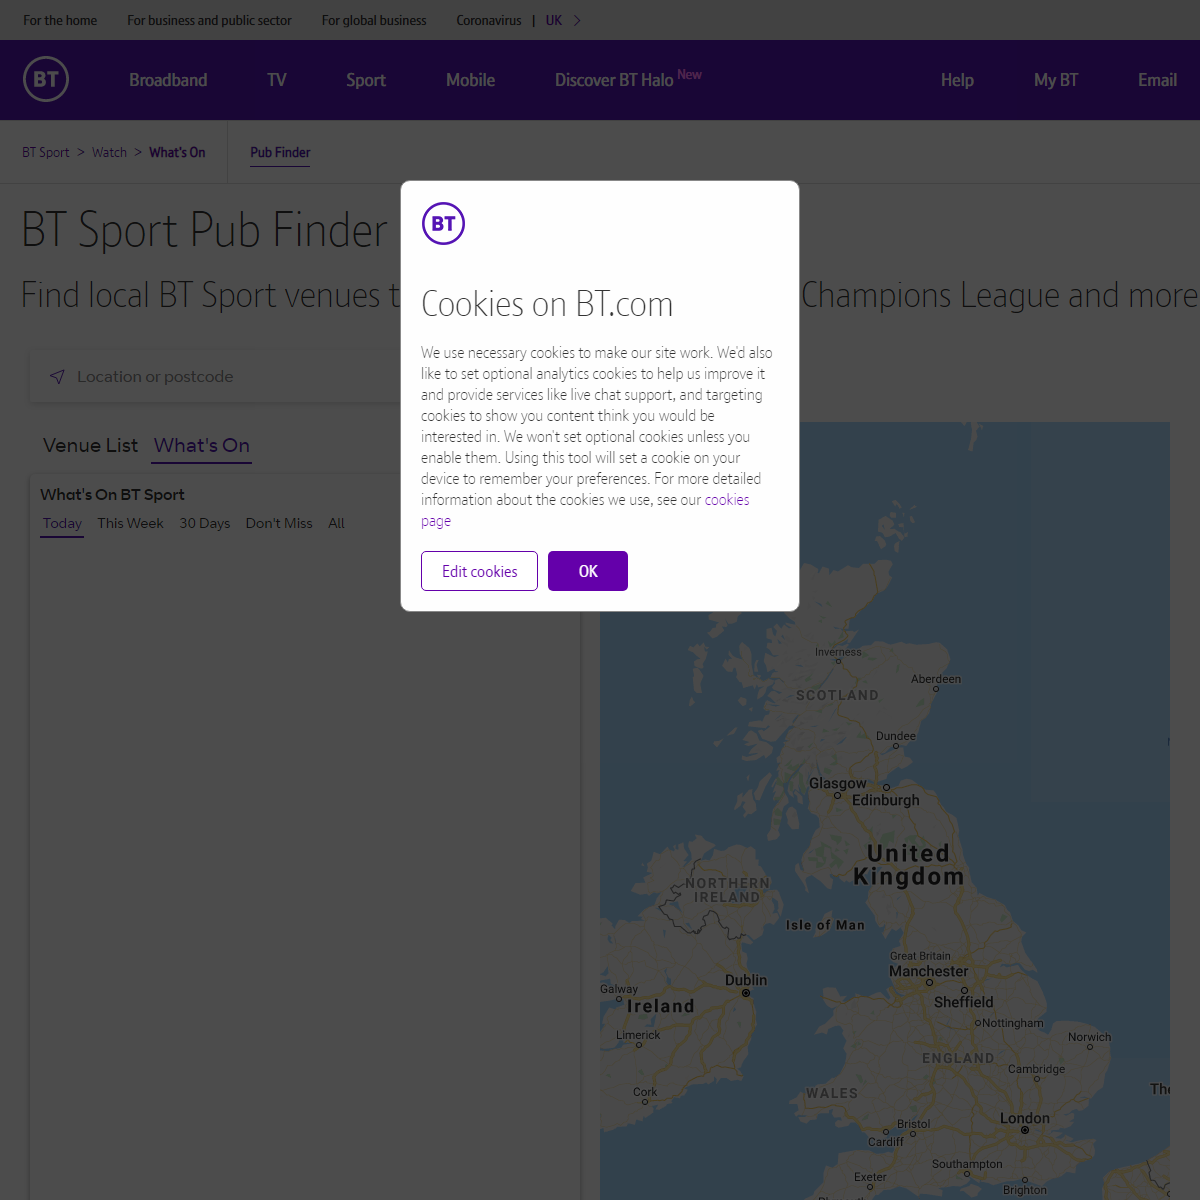 A complete backup of https://www.bt.com/sport/watch/whats-on/pub-finder